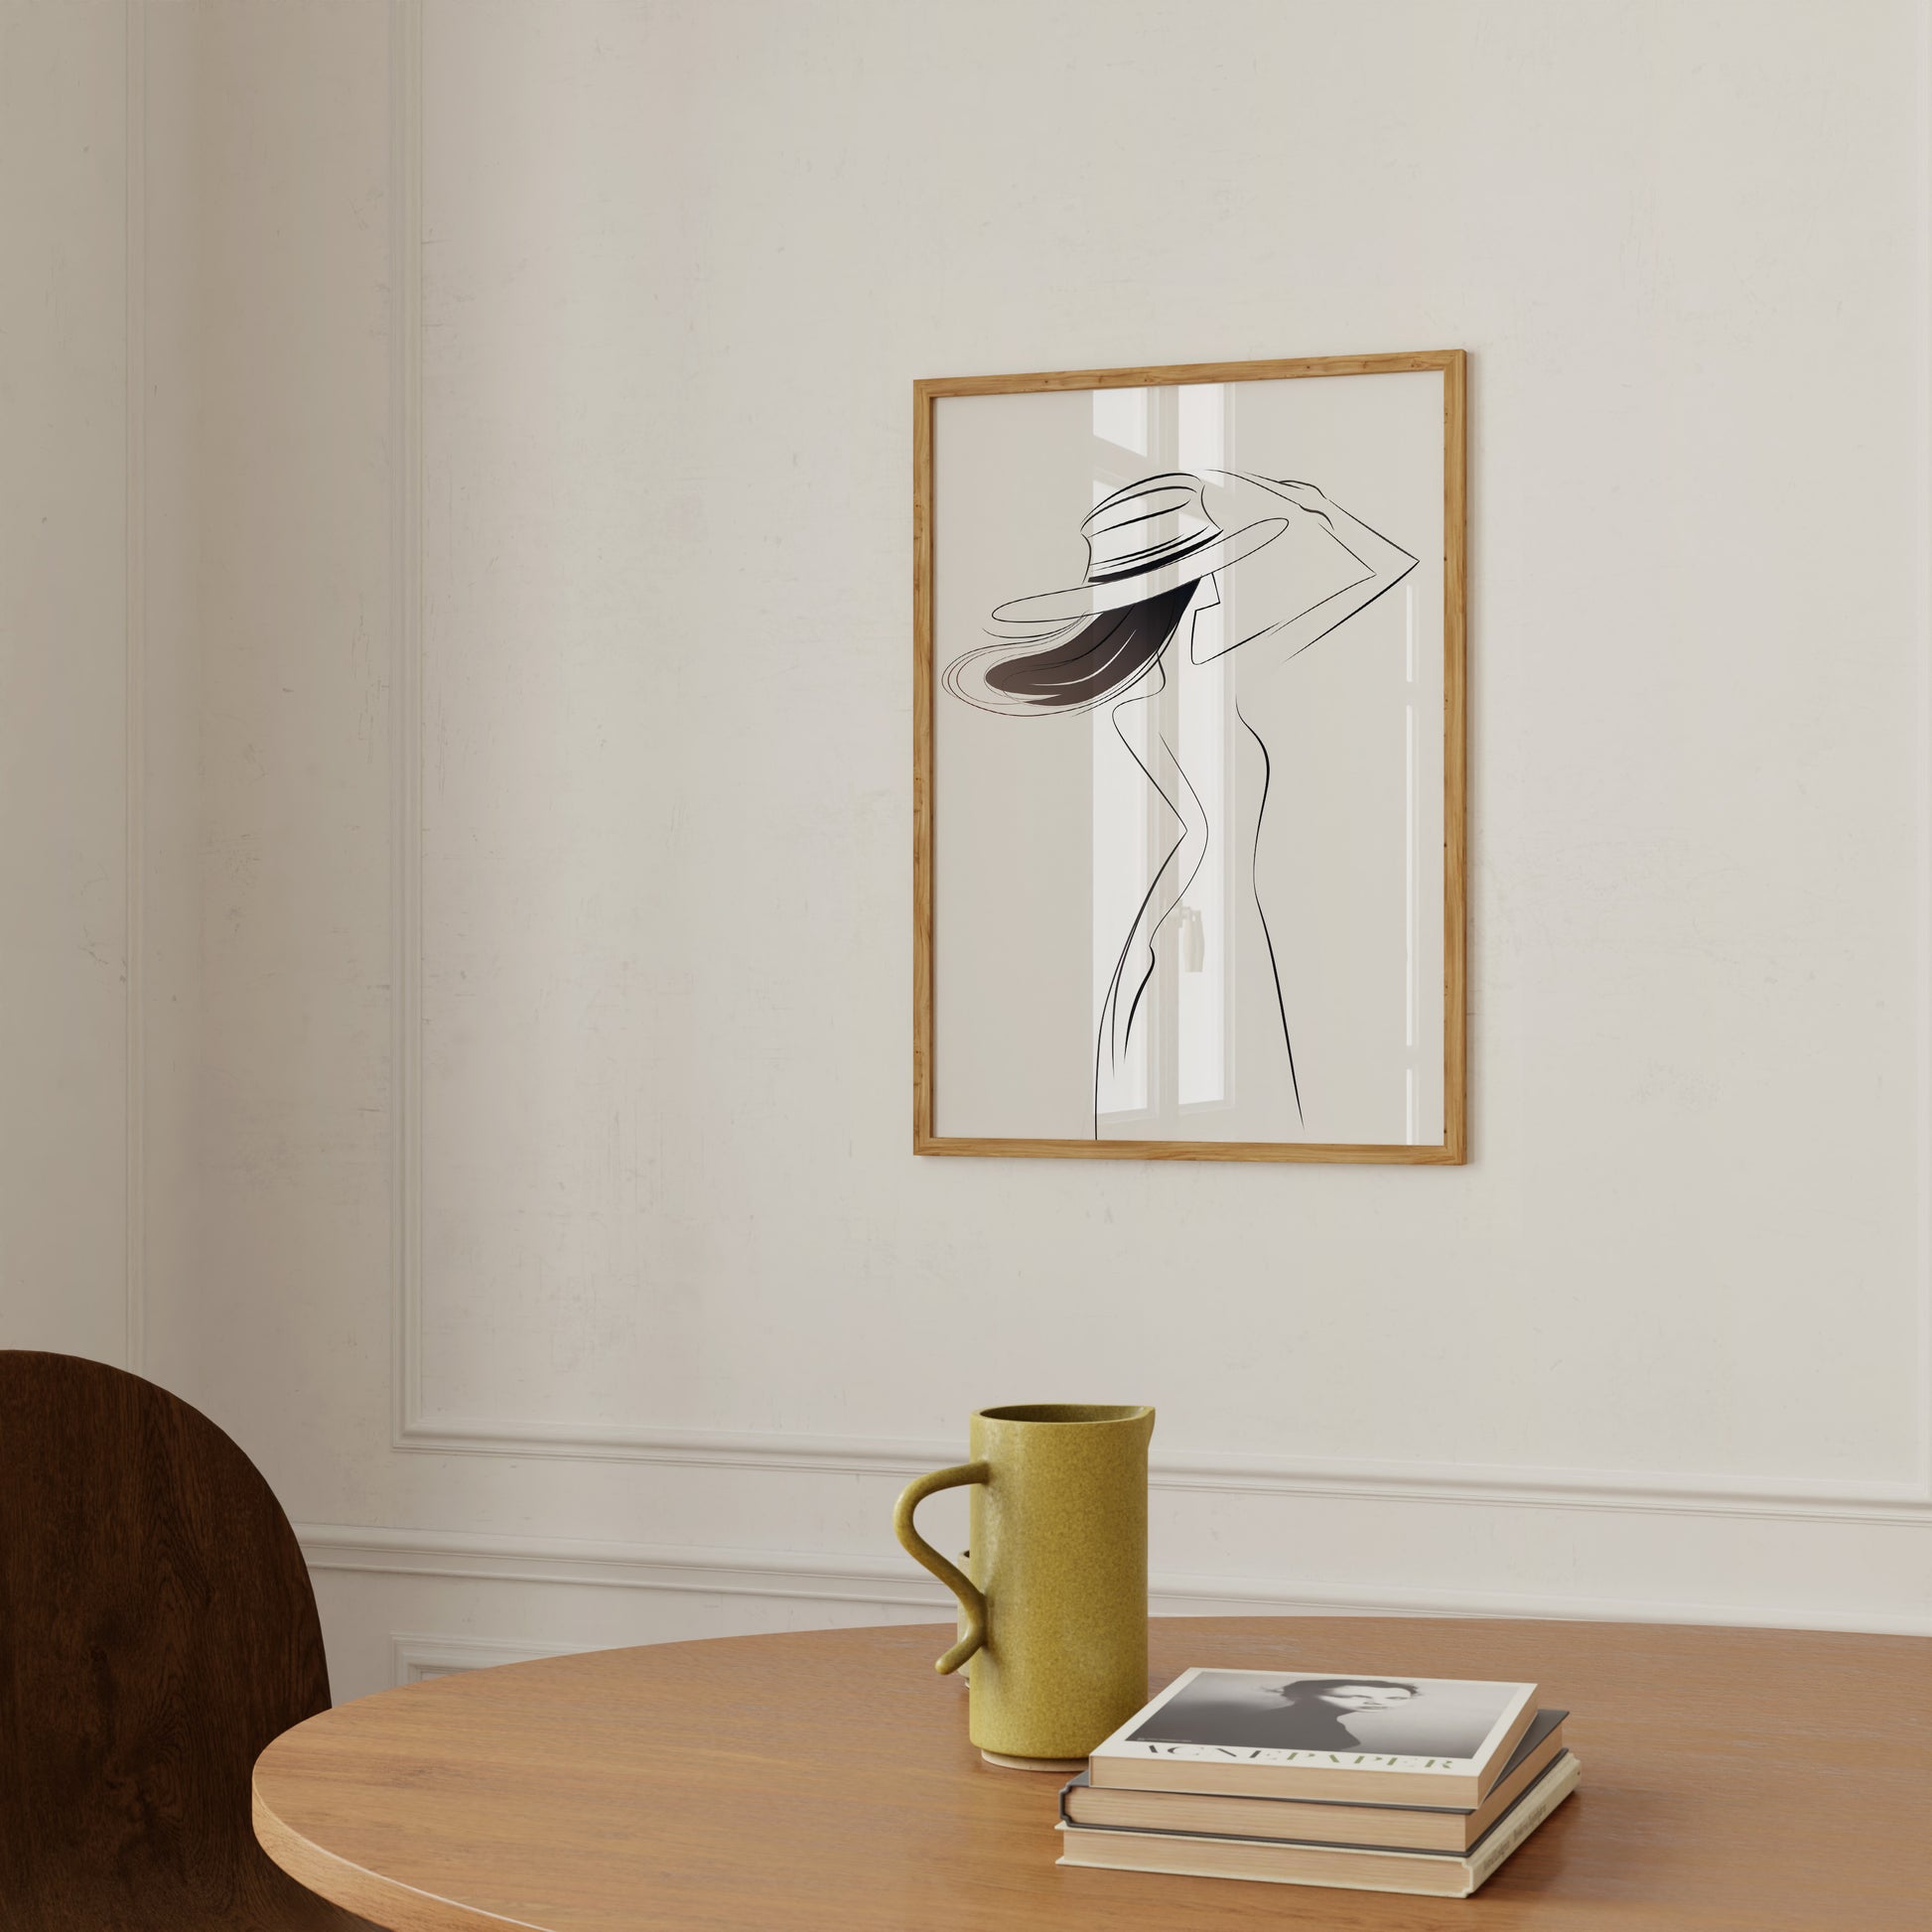 Minimalist artwork of a woman in a frame on a wall above a table with a mug and books.